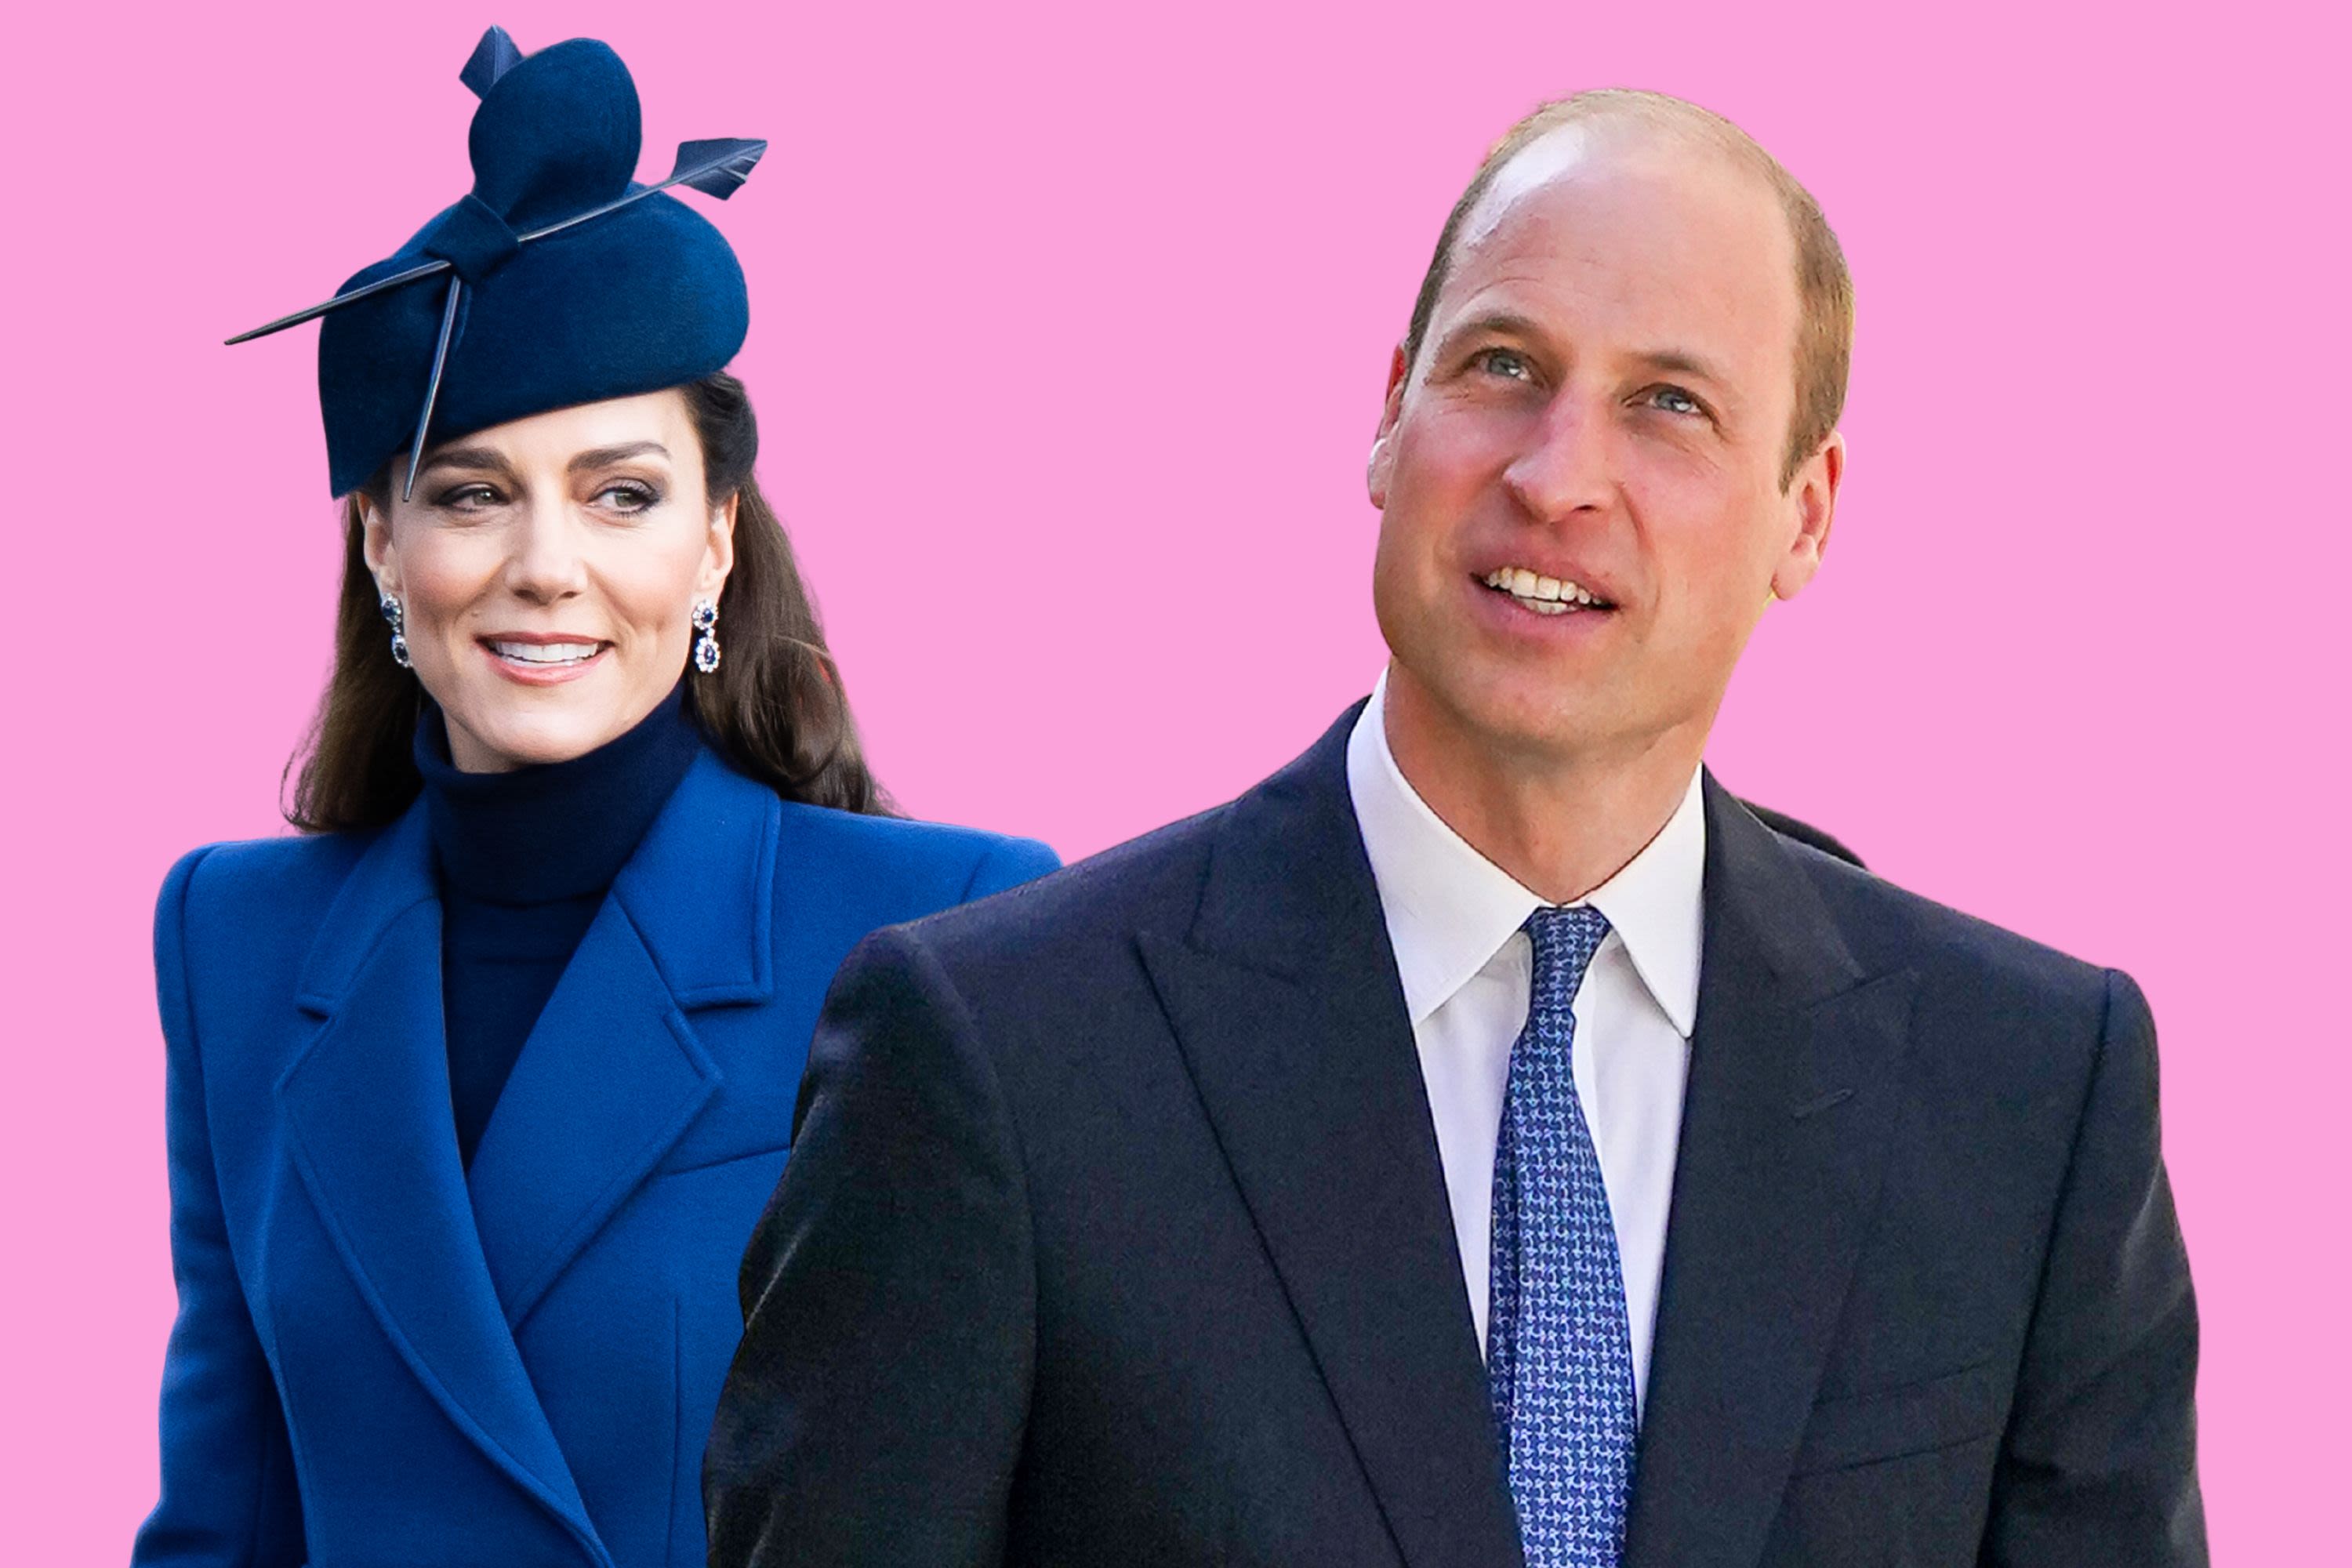 What Prince William said about Princess Kate's cancer recovery